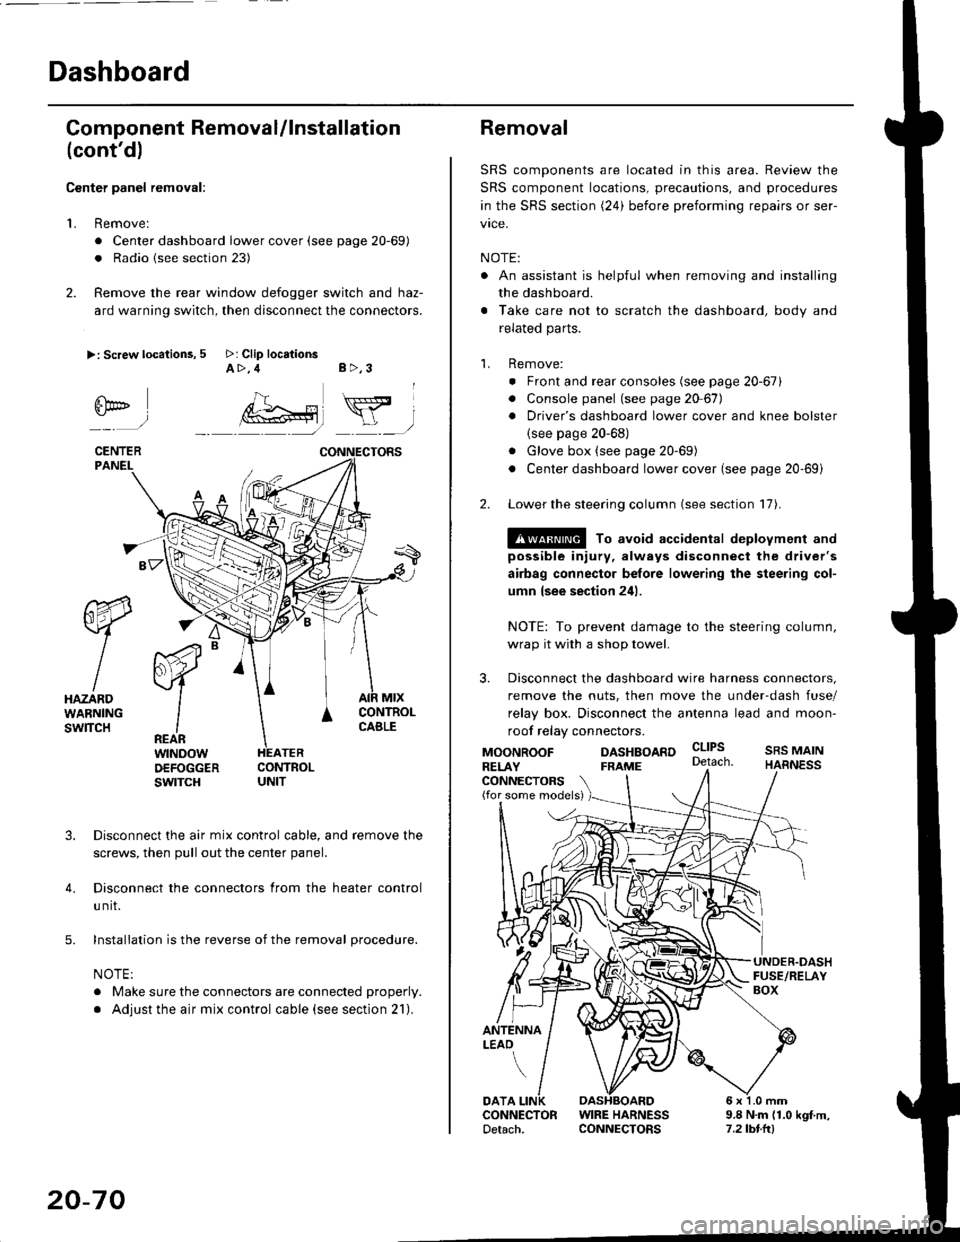 HONDA CIVIC 2000 6.G Workshop Manual Dashboard
Gomponent Removal/lnstallation
(contd)
Center panel removal:
1. Remove:
. Center dashboard lower cover (see page 20-69)
. Radio {see section 23)
2. Remove the rear window defogger switch an